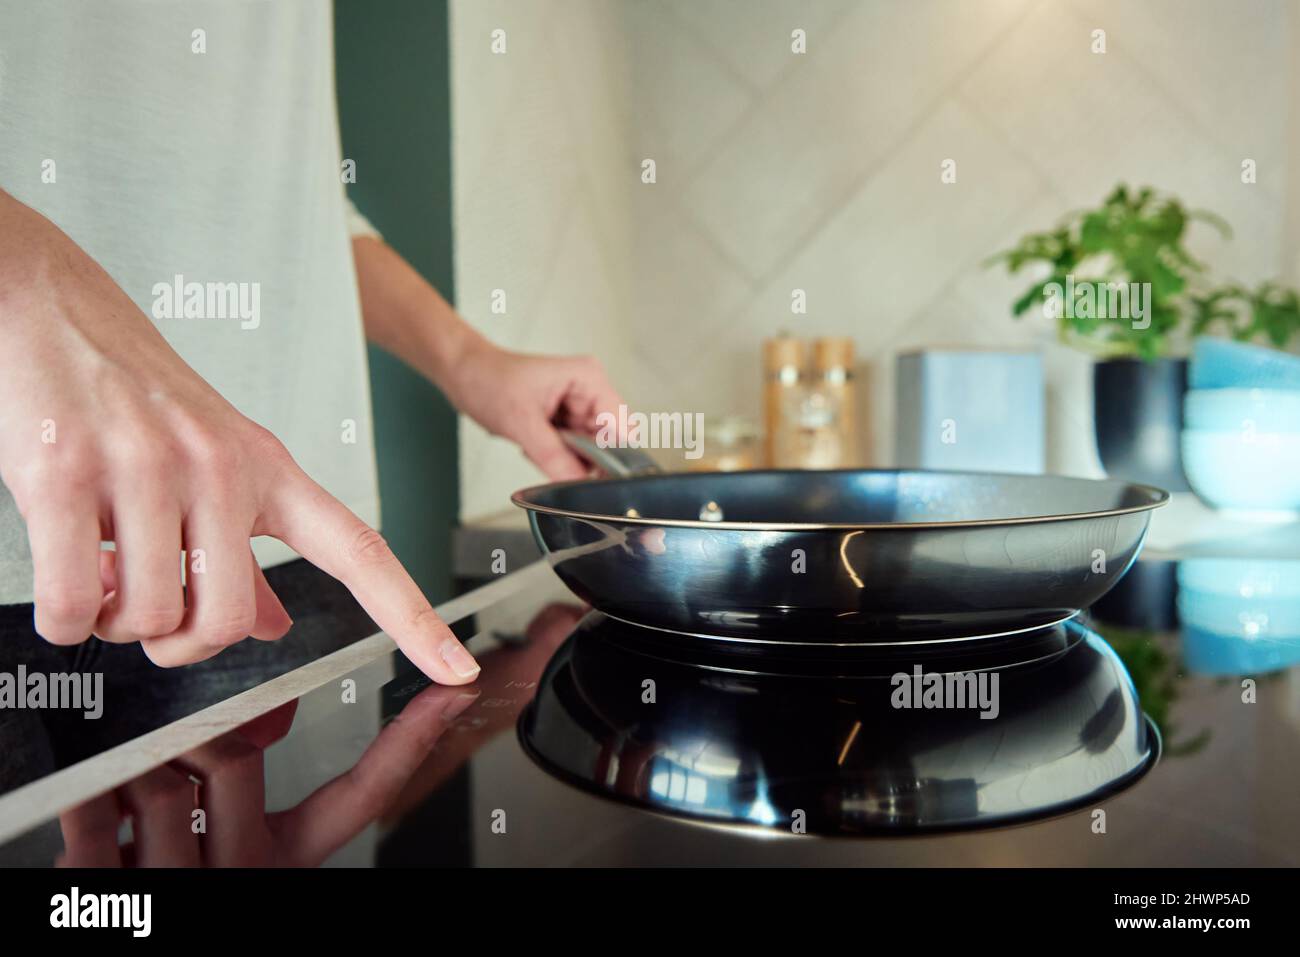 https://c8.alamy.com/comp/2HWP5AD/modern-kitchen-appliance-woman-hand-turn-on-induction-stove-with-steel-frying-pan-finger-touching-sensor-button-on-induction-or-electrical-hob-2HWP5AD.jpg